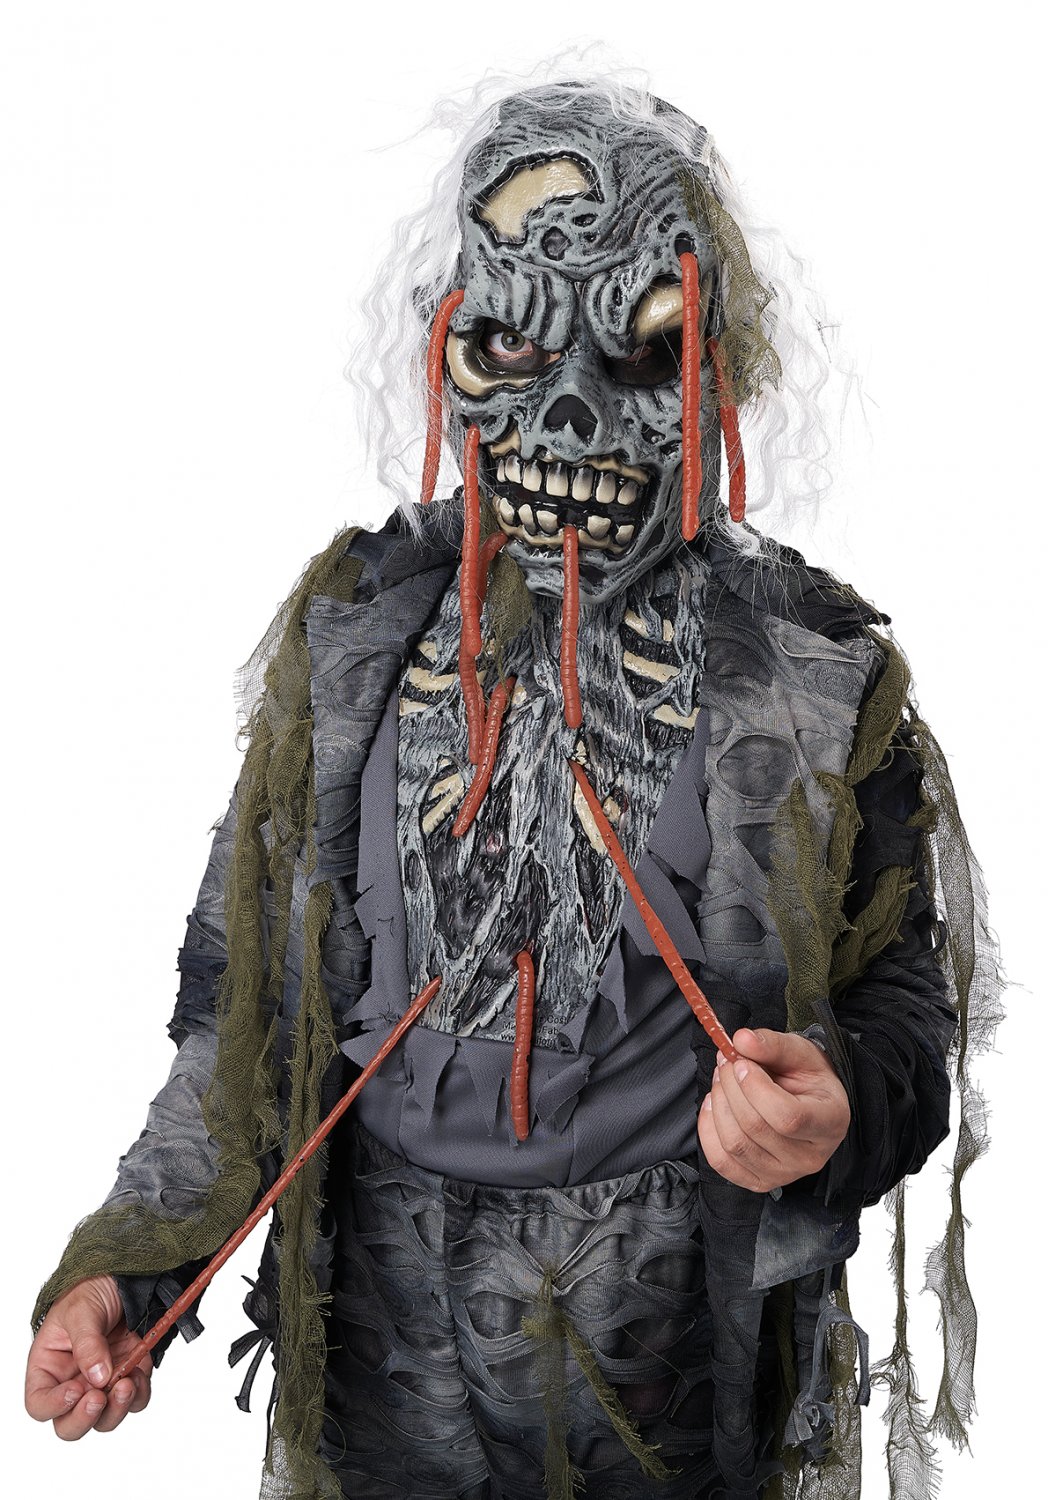 Size: Large #3120-087 Return of the Walking Dead Grave Zombie Child Costume